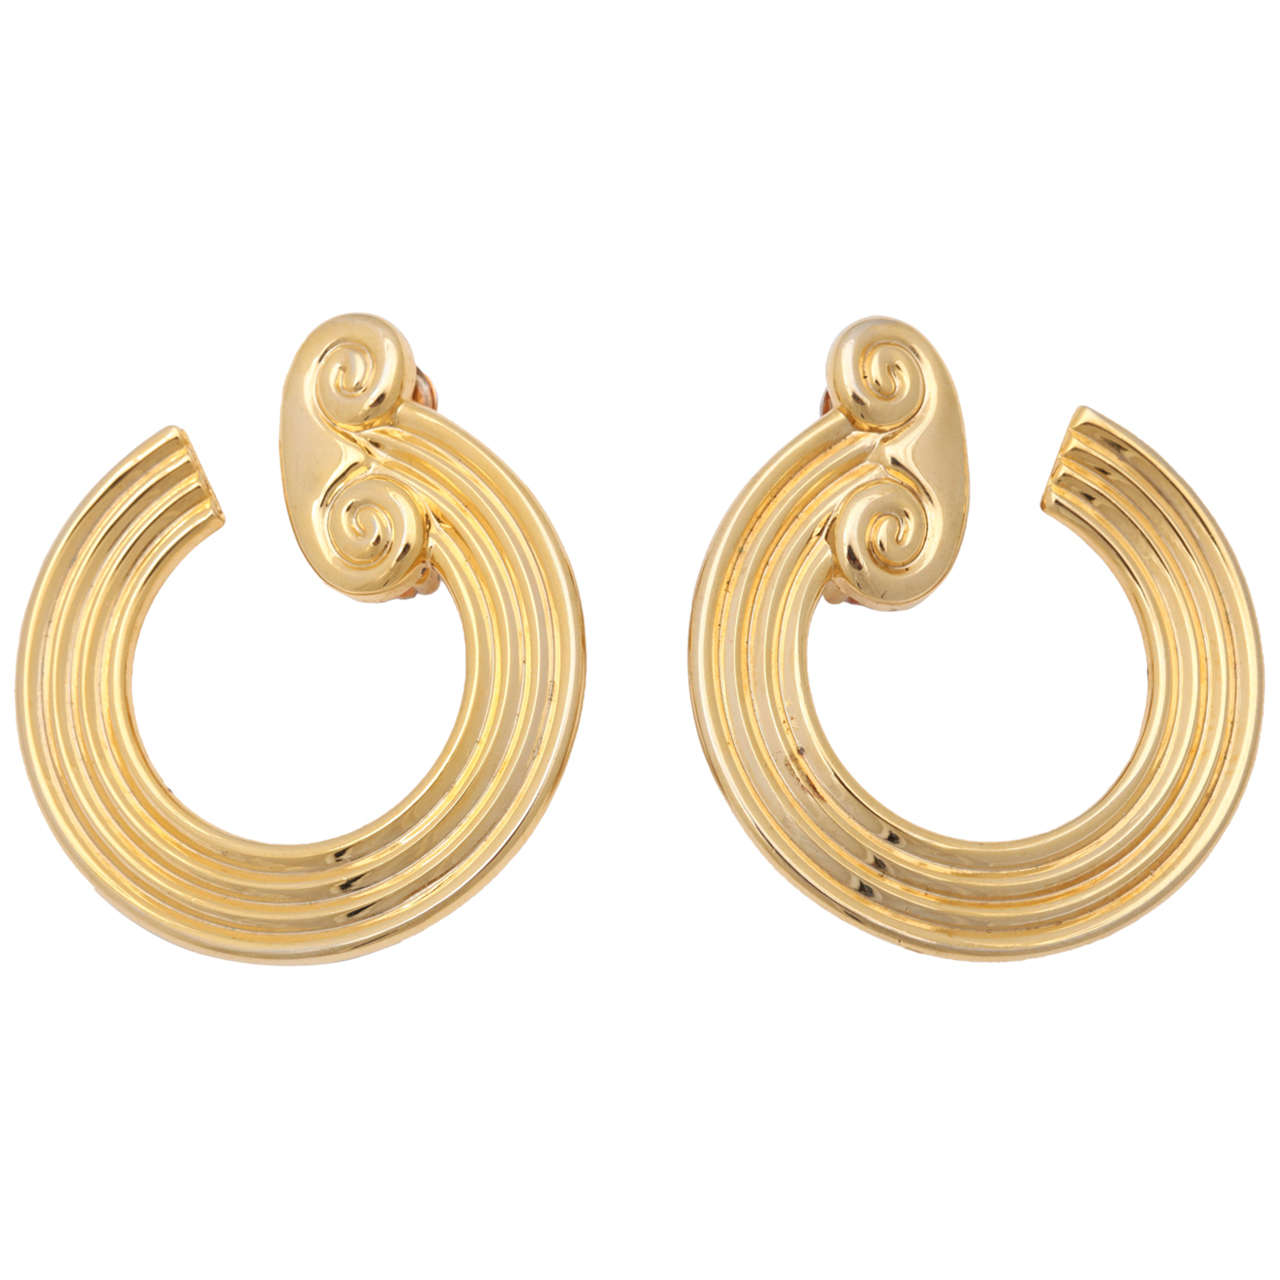 Pair of Curved Ionic Column "Gold" Earrings, Costume Jewelry For Sale